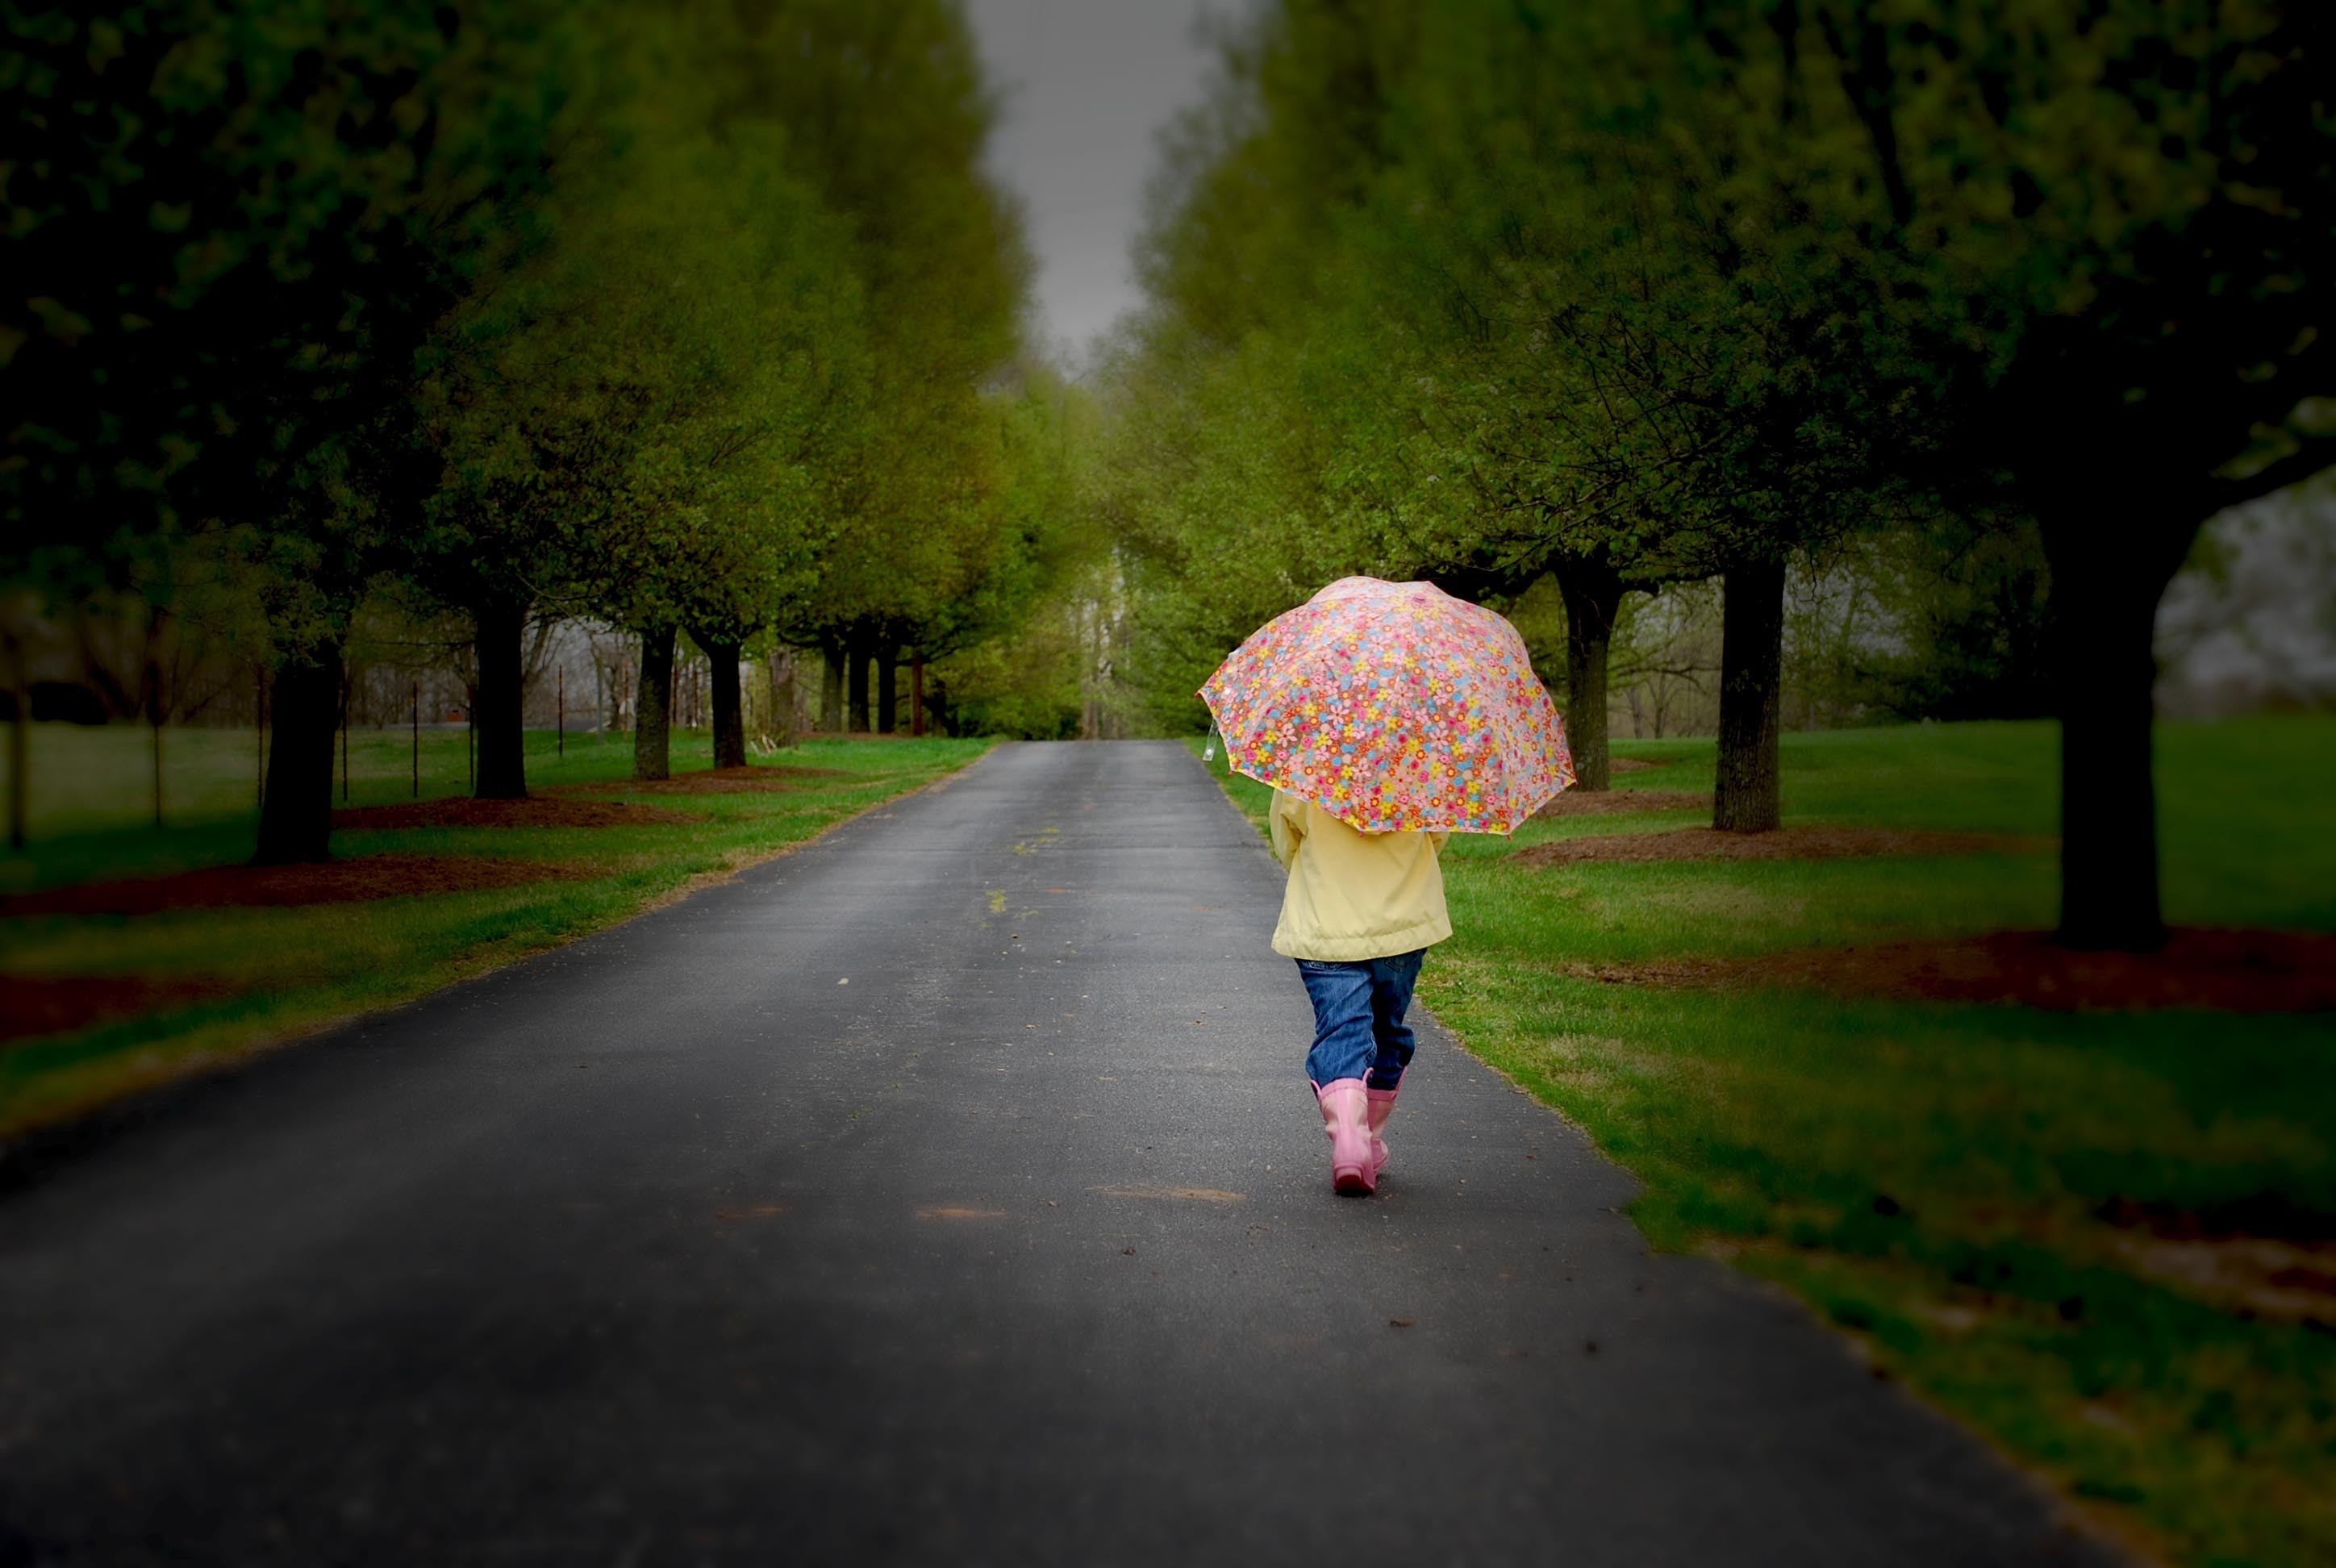 park, wood, miscellanea, miscellaneous, road, tree, stroll, overcast, mainly cloudy, umbrella wallpaper for mobile